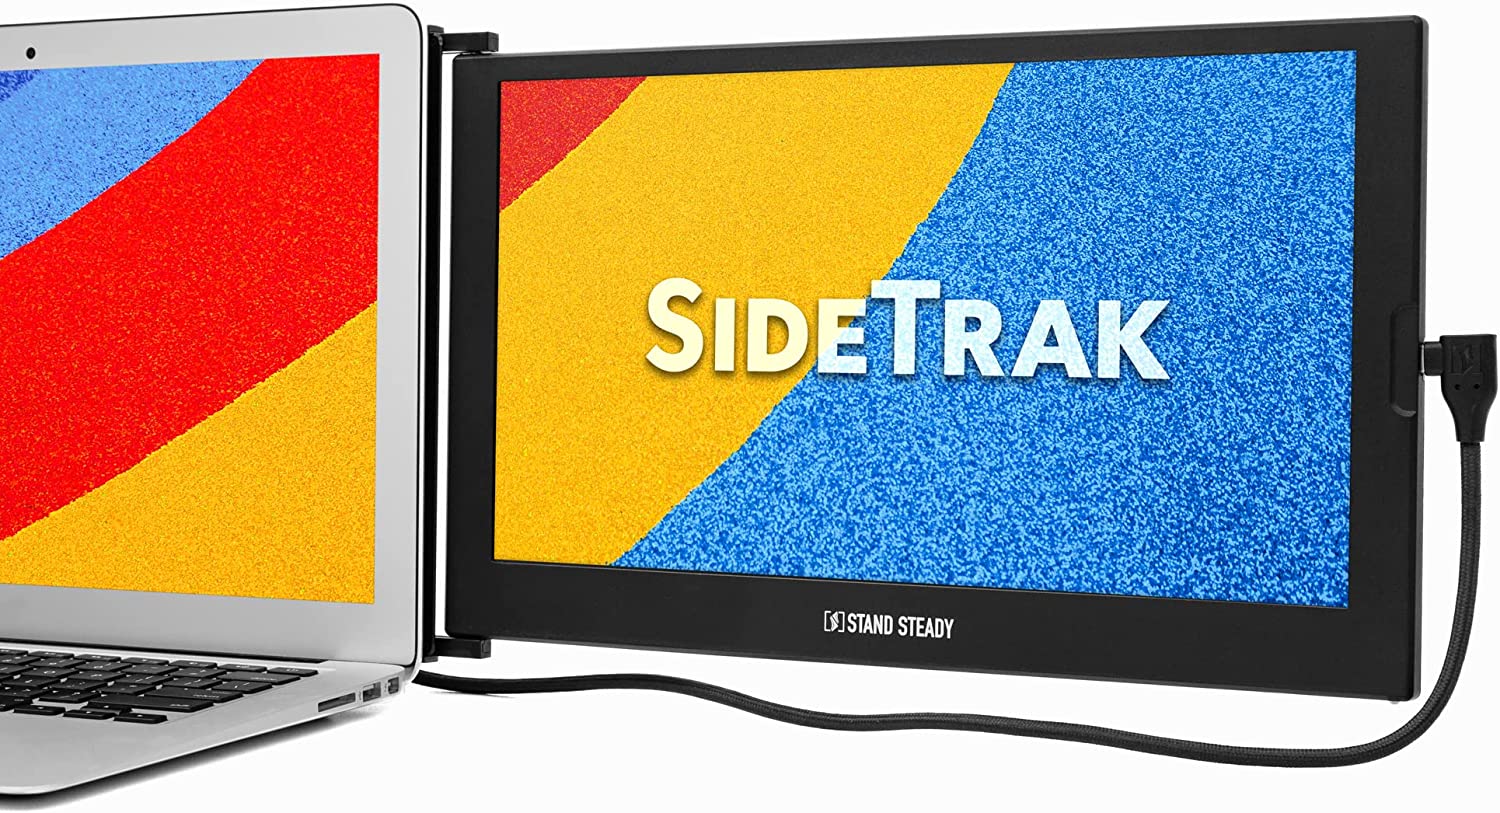 For your laptop, here are the top 7 portable monitors